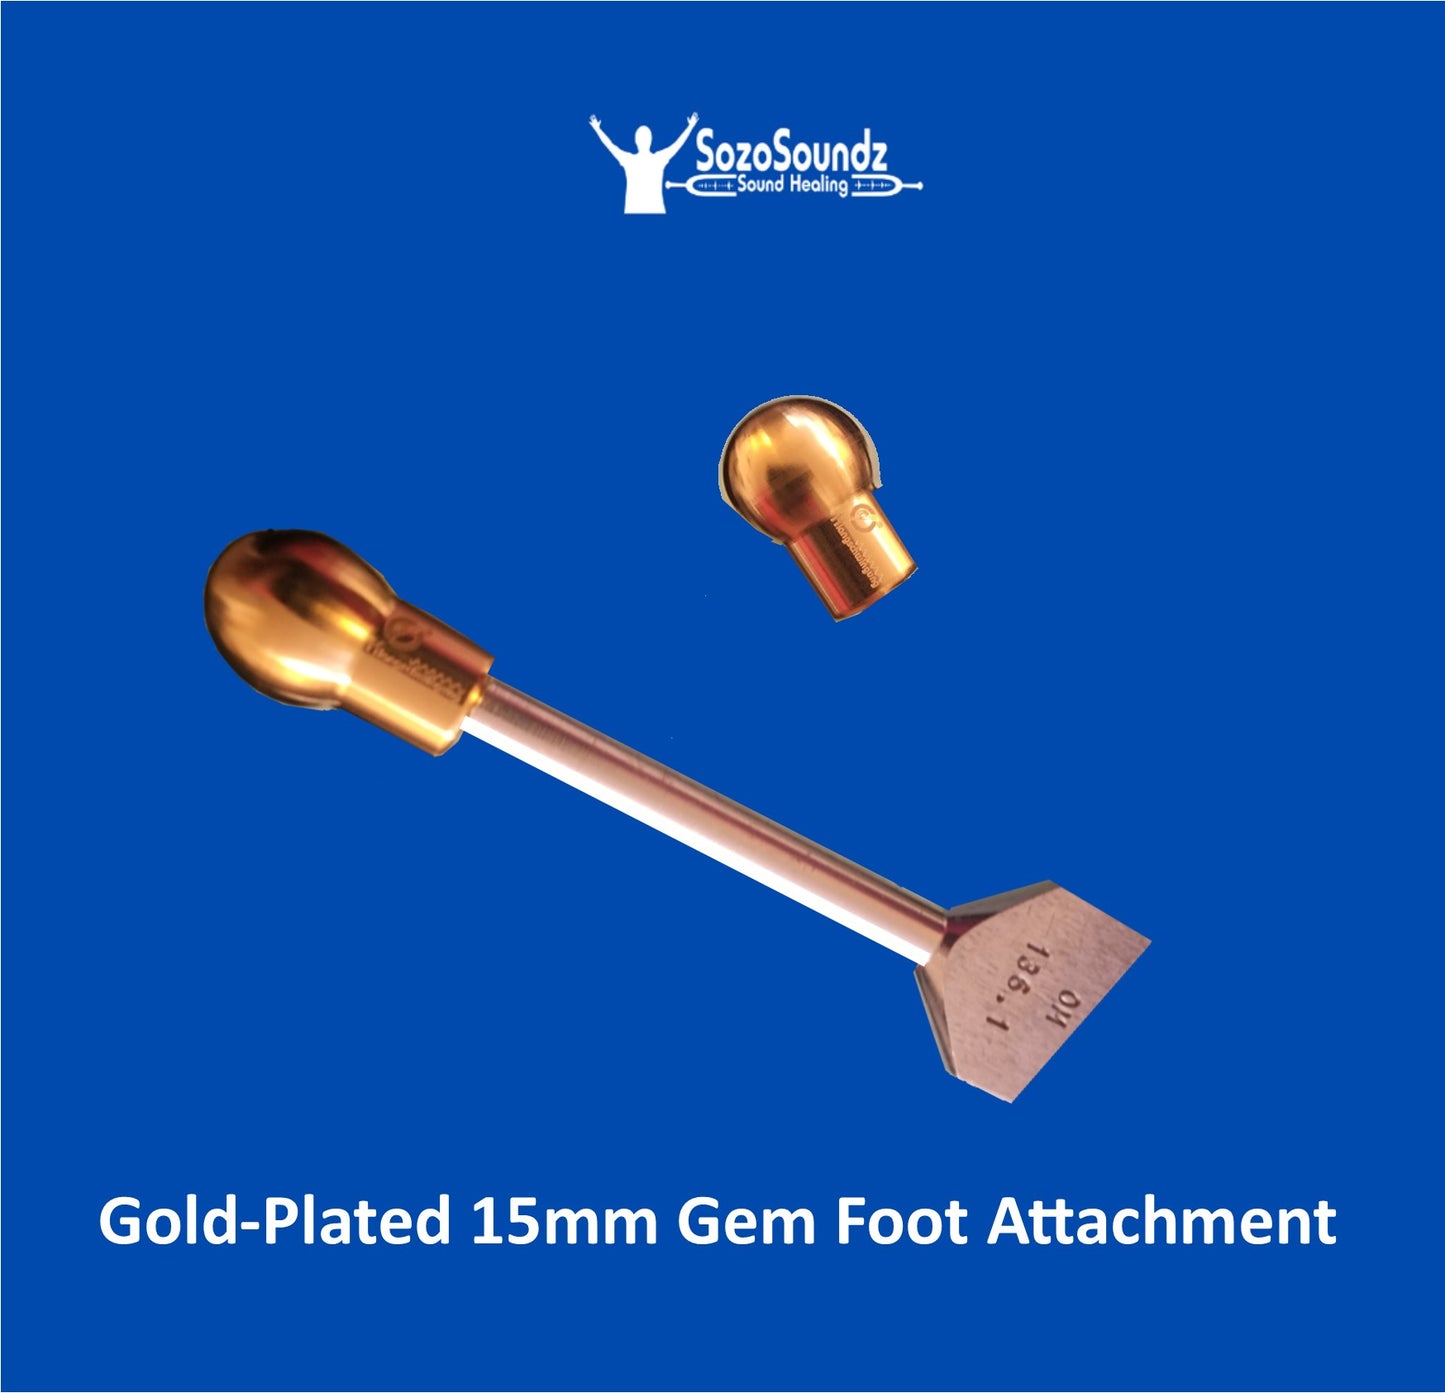 Gold-Plated 15mm Solid Gem Foot Attachment (Otto fork not included)